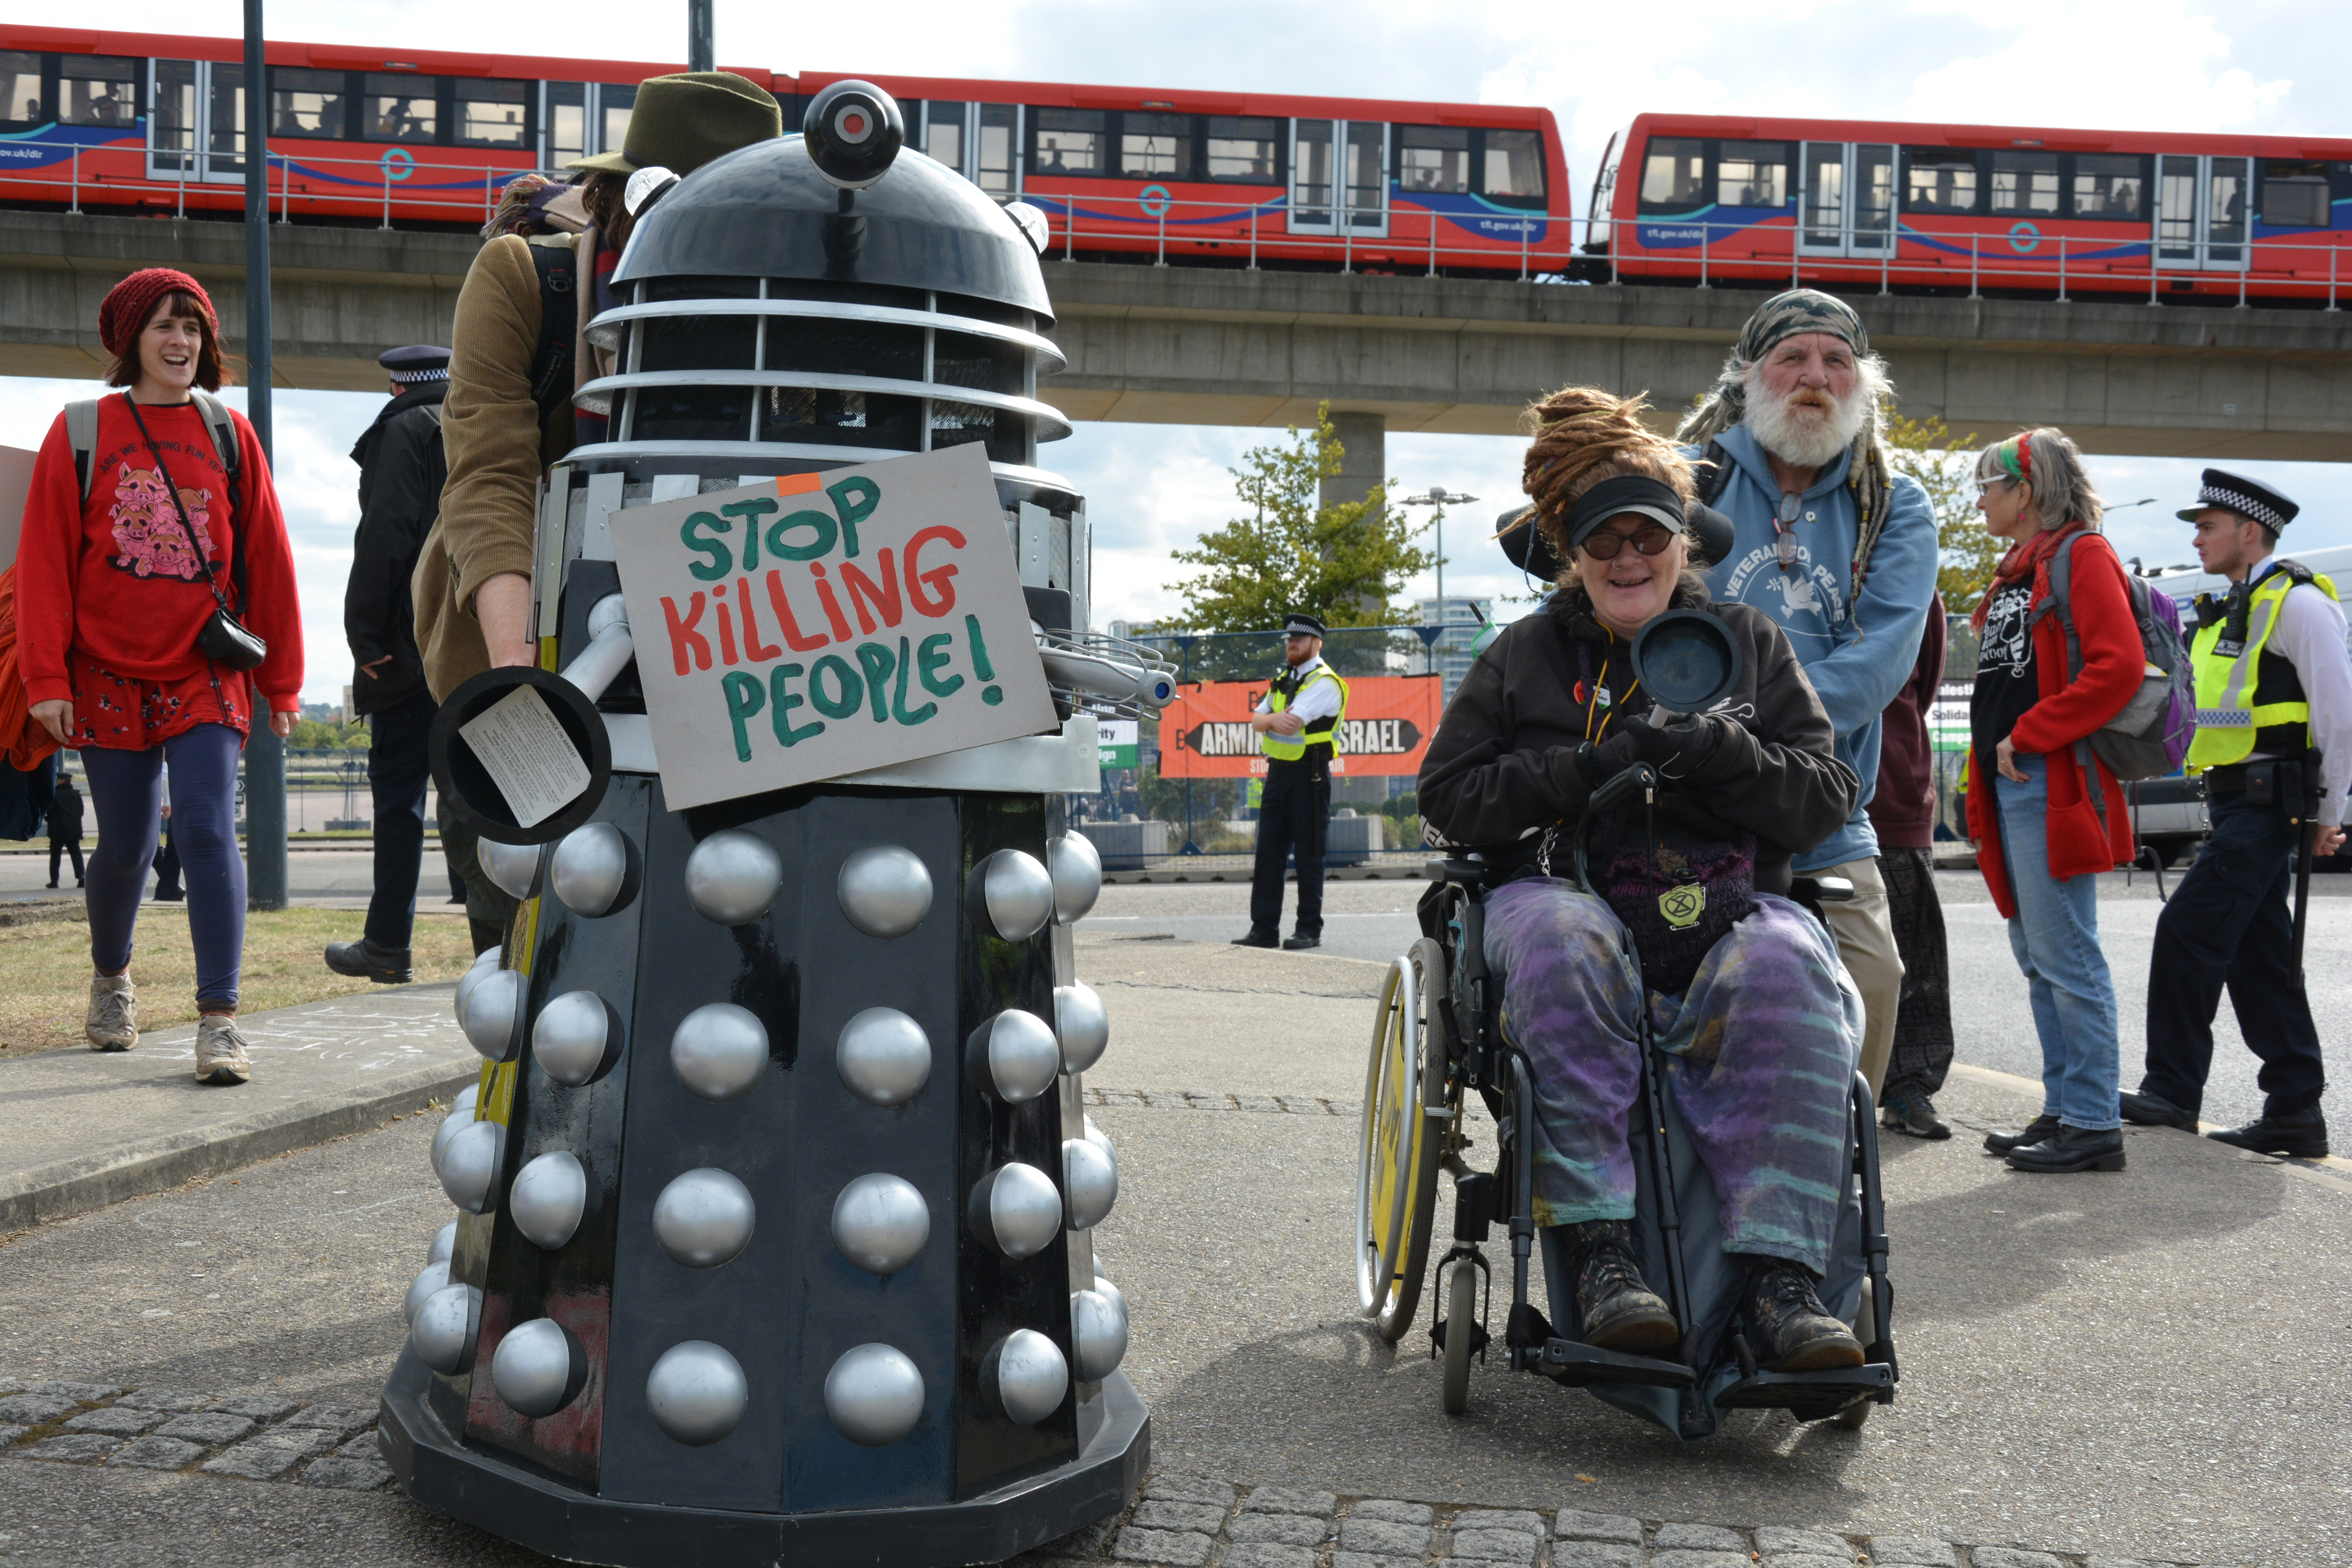 Dalek with banner saying 'stop killing people' outside DSEI